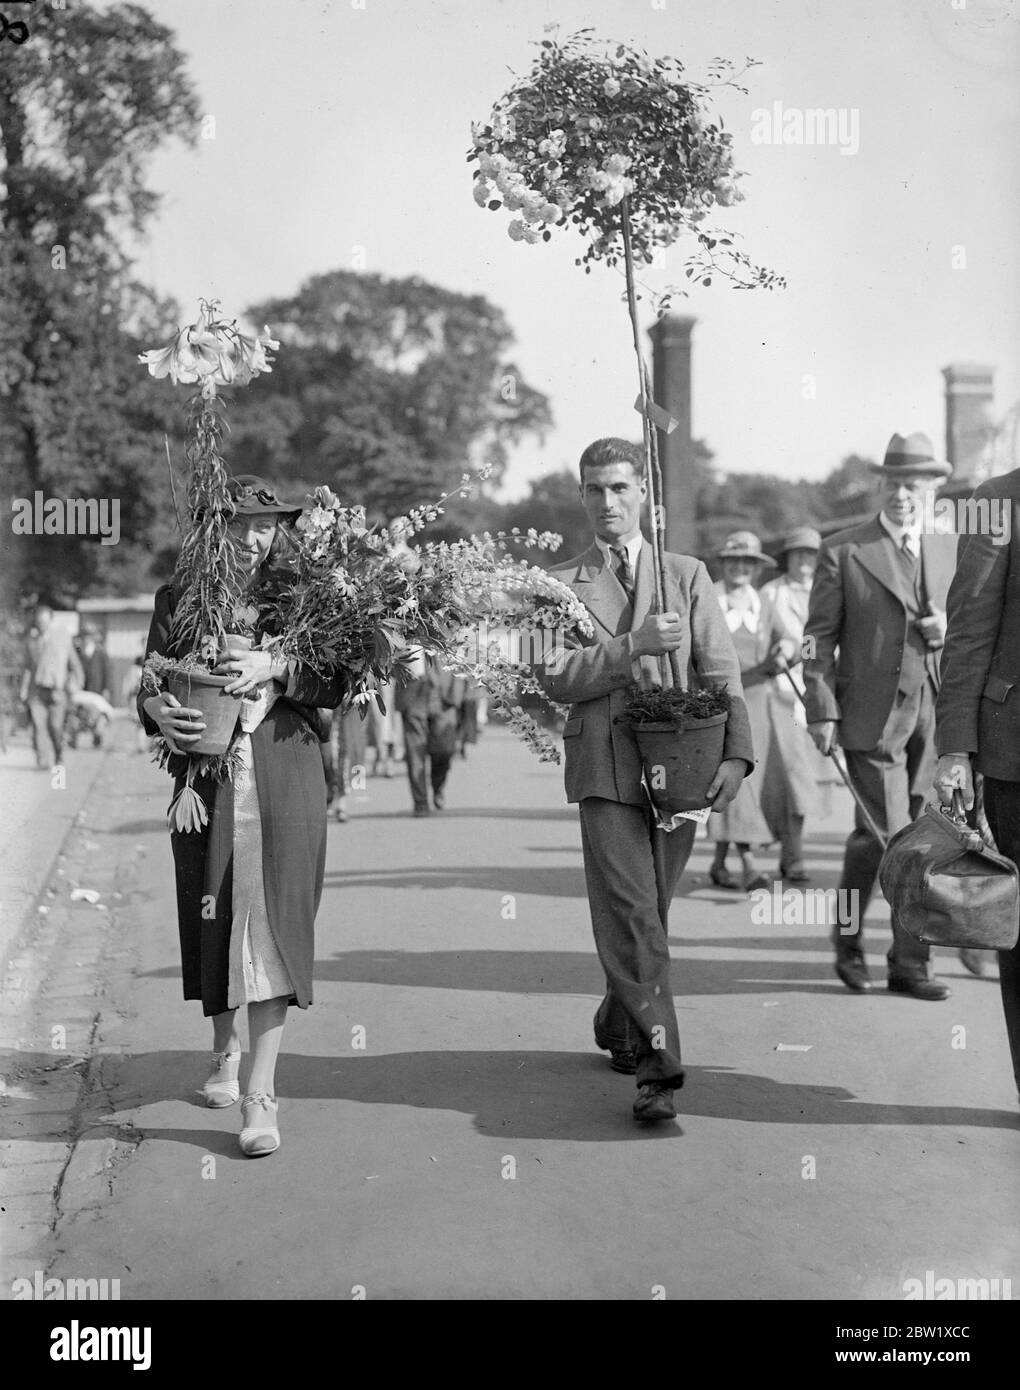 Harvest of the Chelsea flower show. Hundreds of blooms were given away at the Royal Hospital grounds when the Chelsea flower show came to an end today (Friday). Photo shows people leaving the flower show laden with blooms after the show had closed. 28 May 1937 Stock Photo